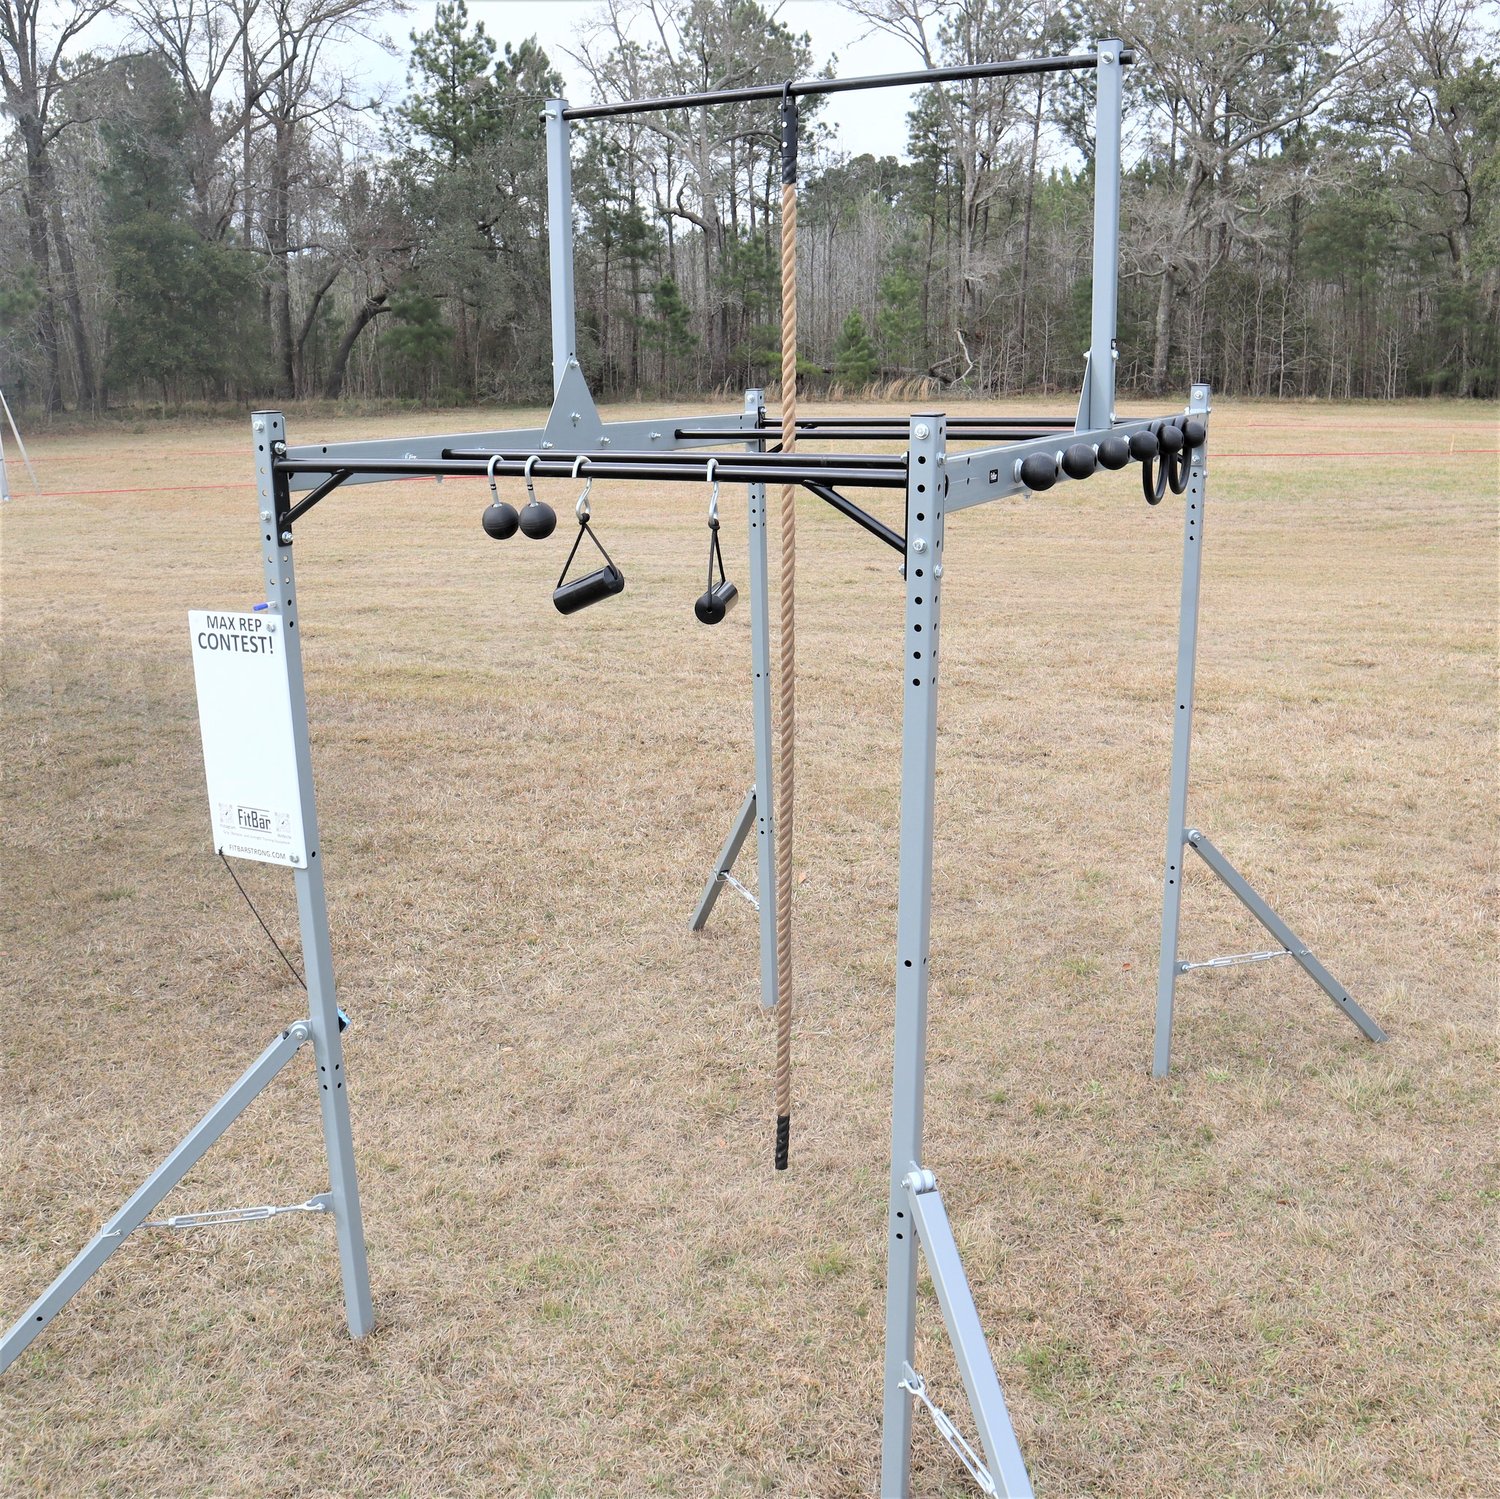 Portable Monkey Bars - FitBar Grip, Obstacle, Strength Equipment